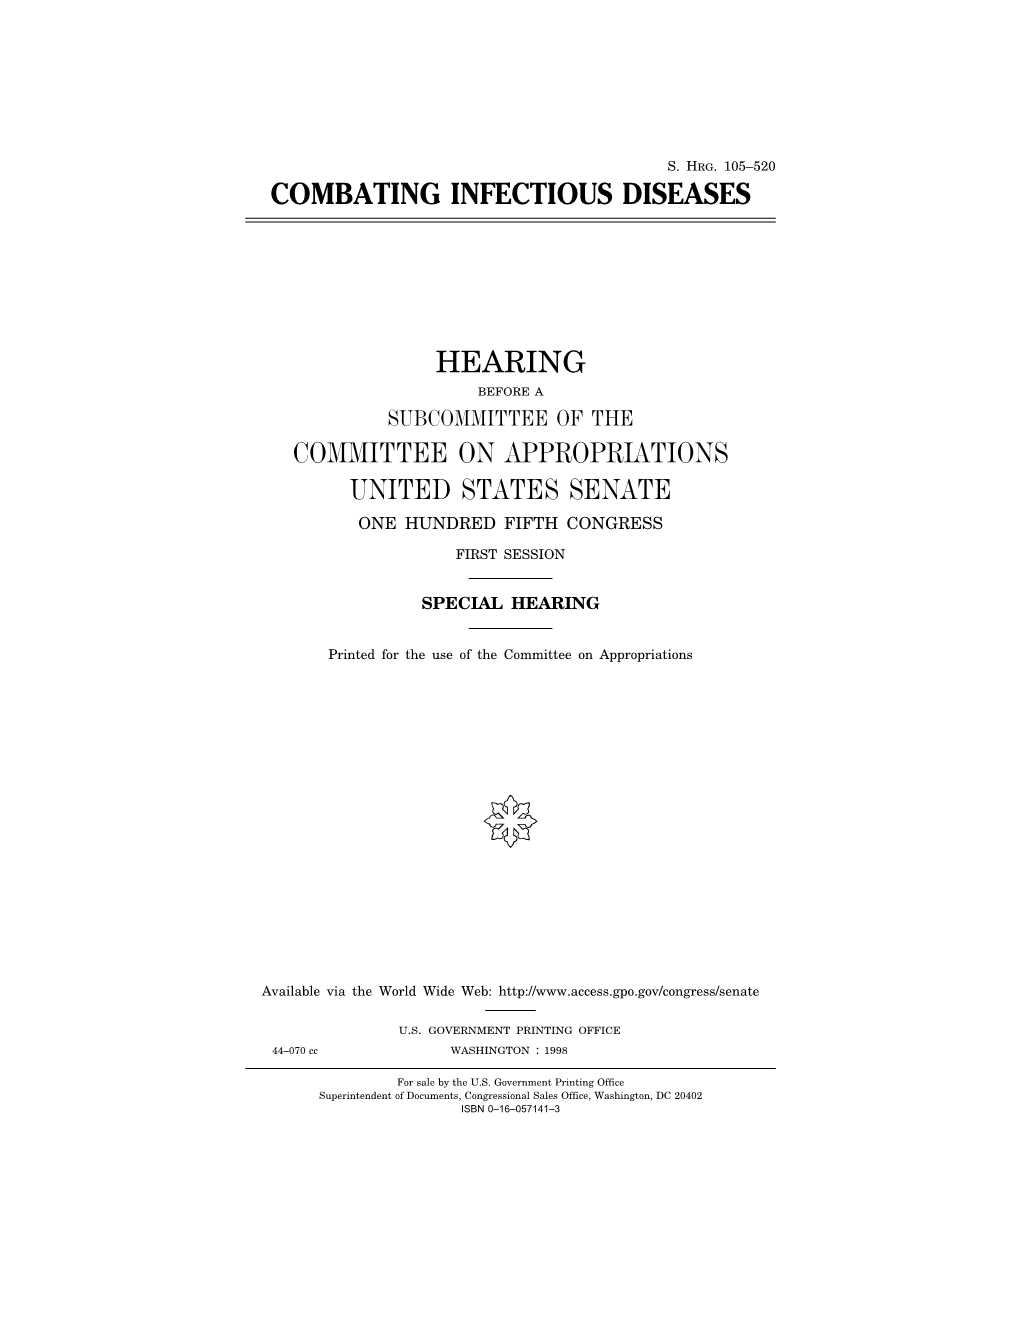 Combating Infectious Diseases Hearing Committee